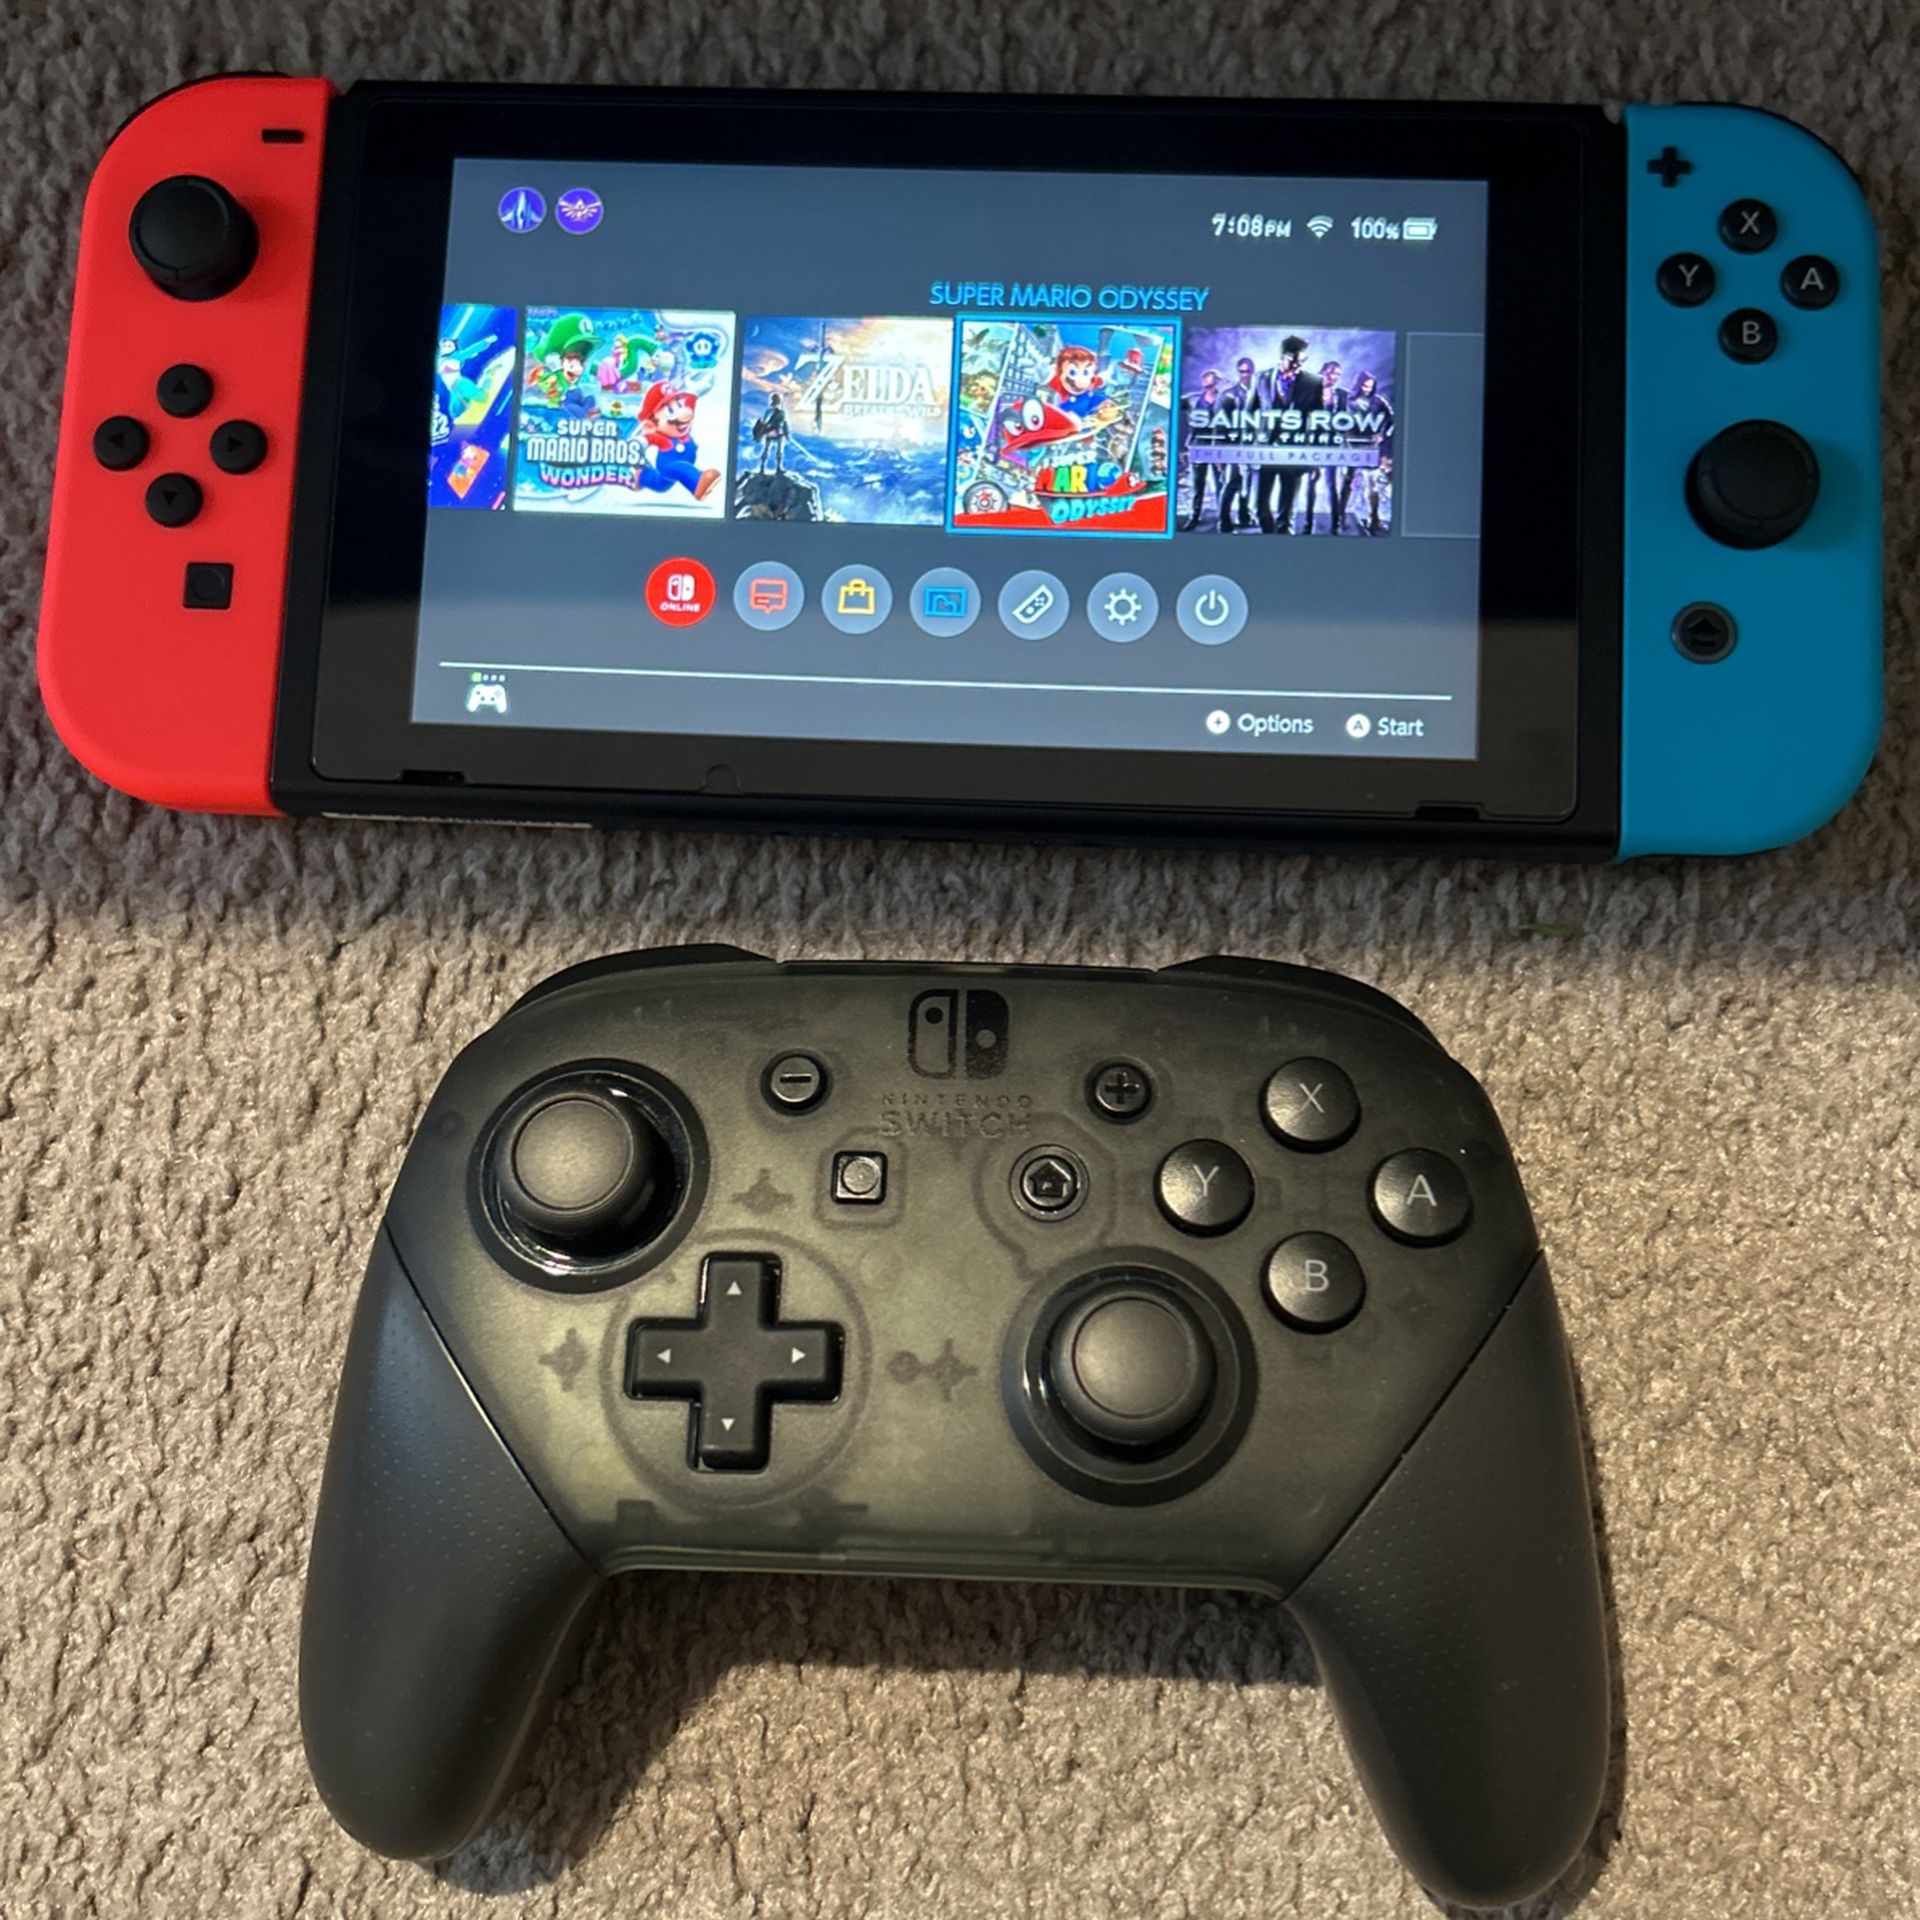 Chip Modded V2 Nintendo Switch With Pro Controllers And 128gb SD Card